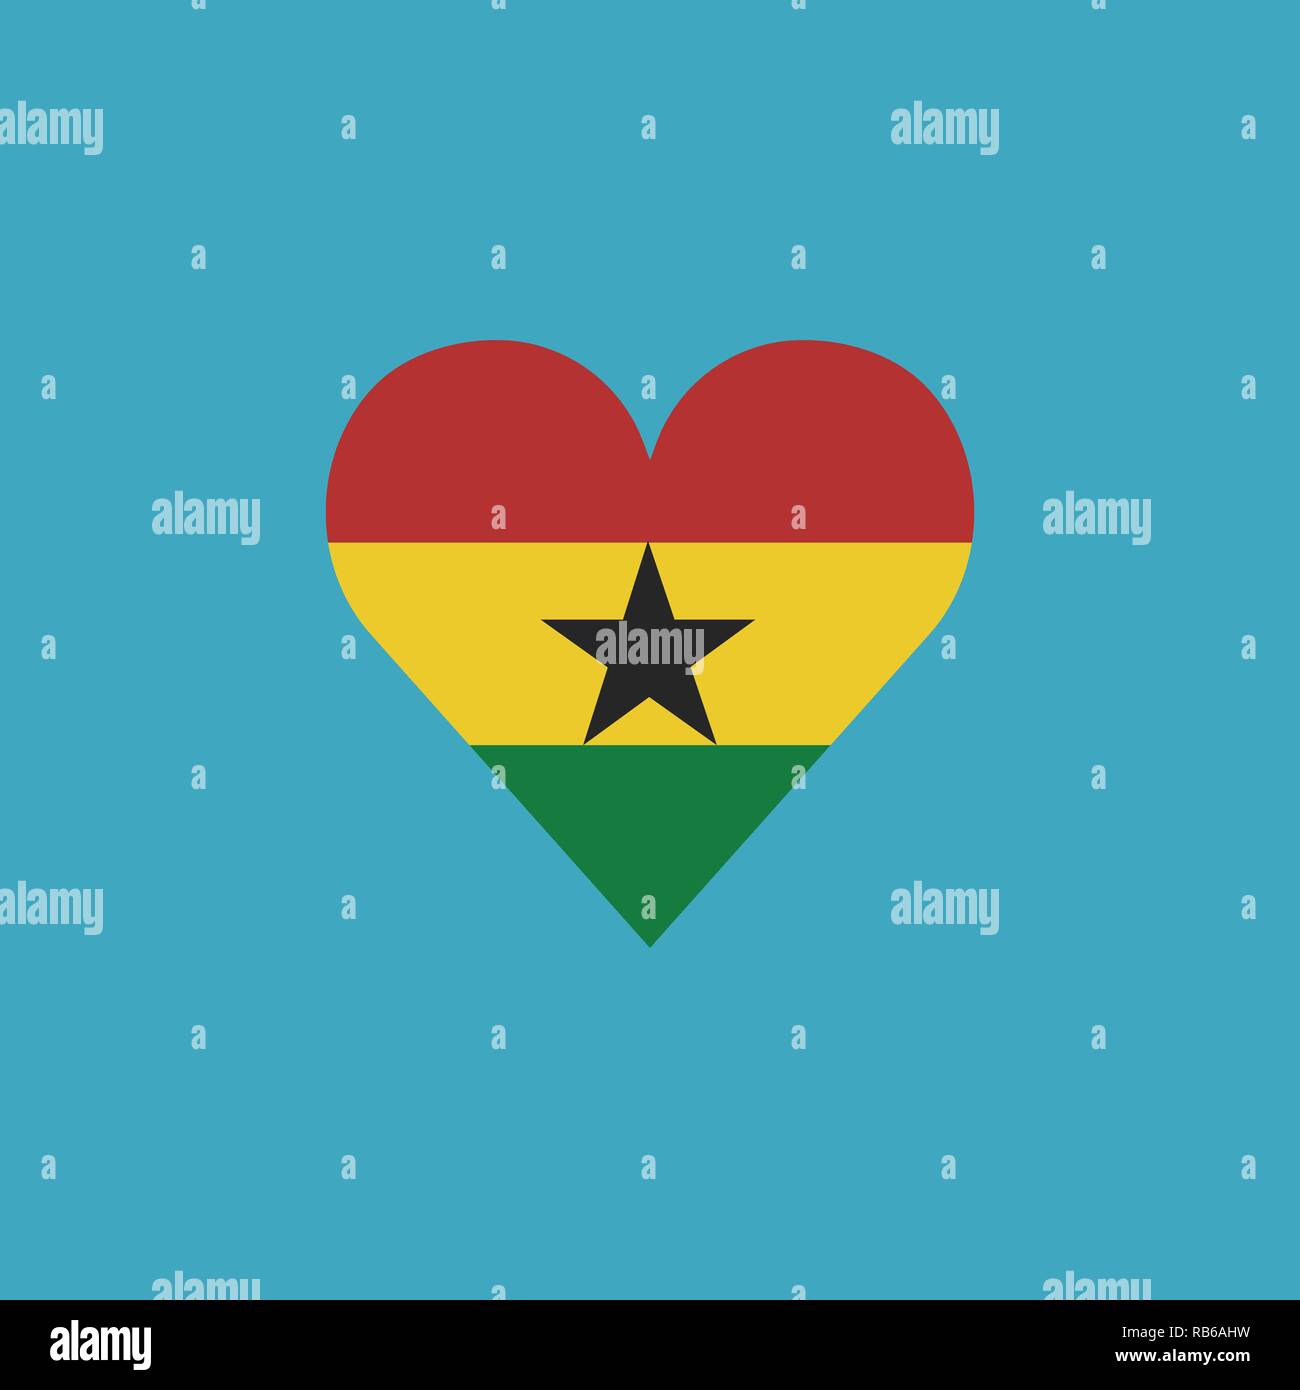 Ghana flag icon in a heart shape in flat design. Independence day or National day holiday concept. Stock Vector